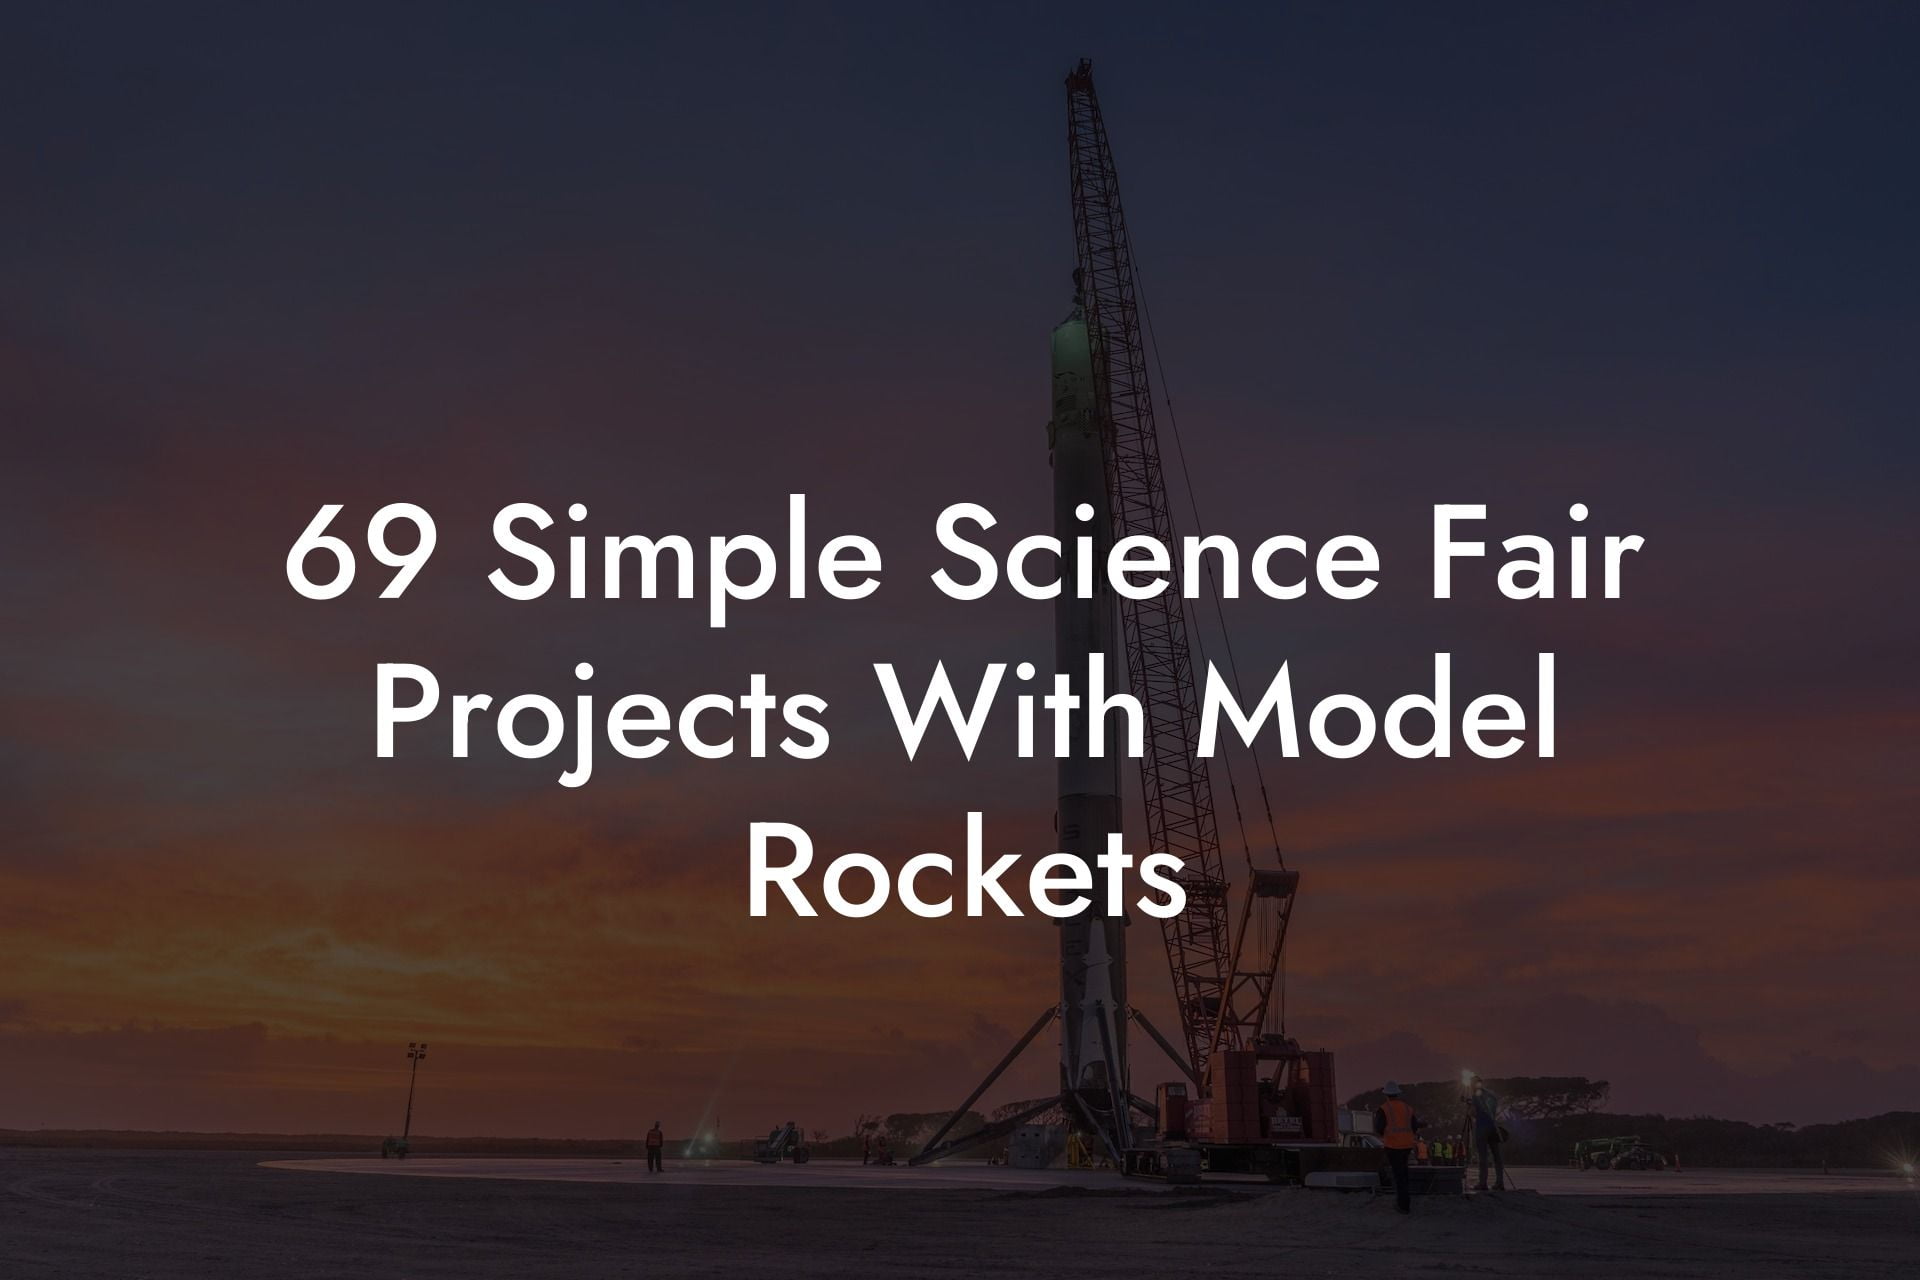 69 Simple Science Fair Projects With Model Rockets